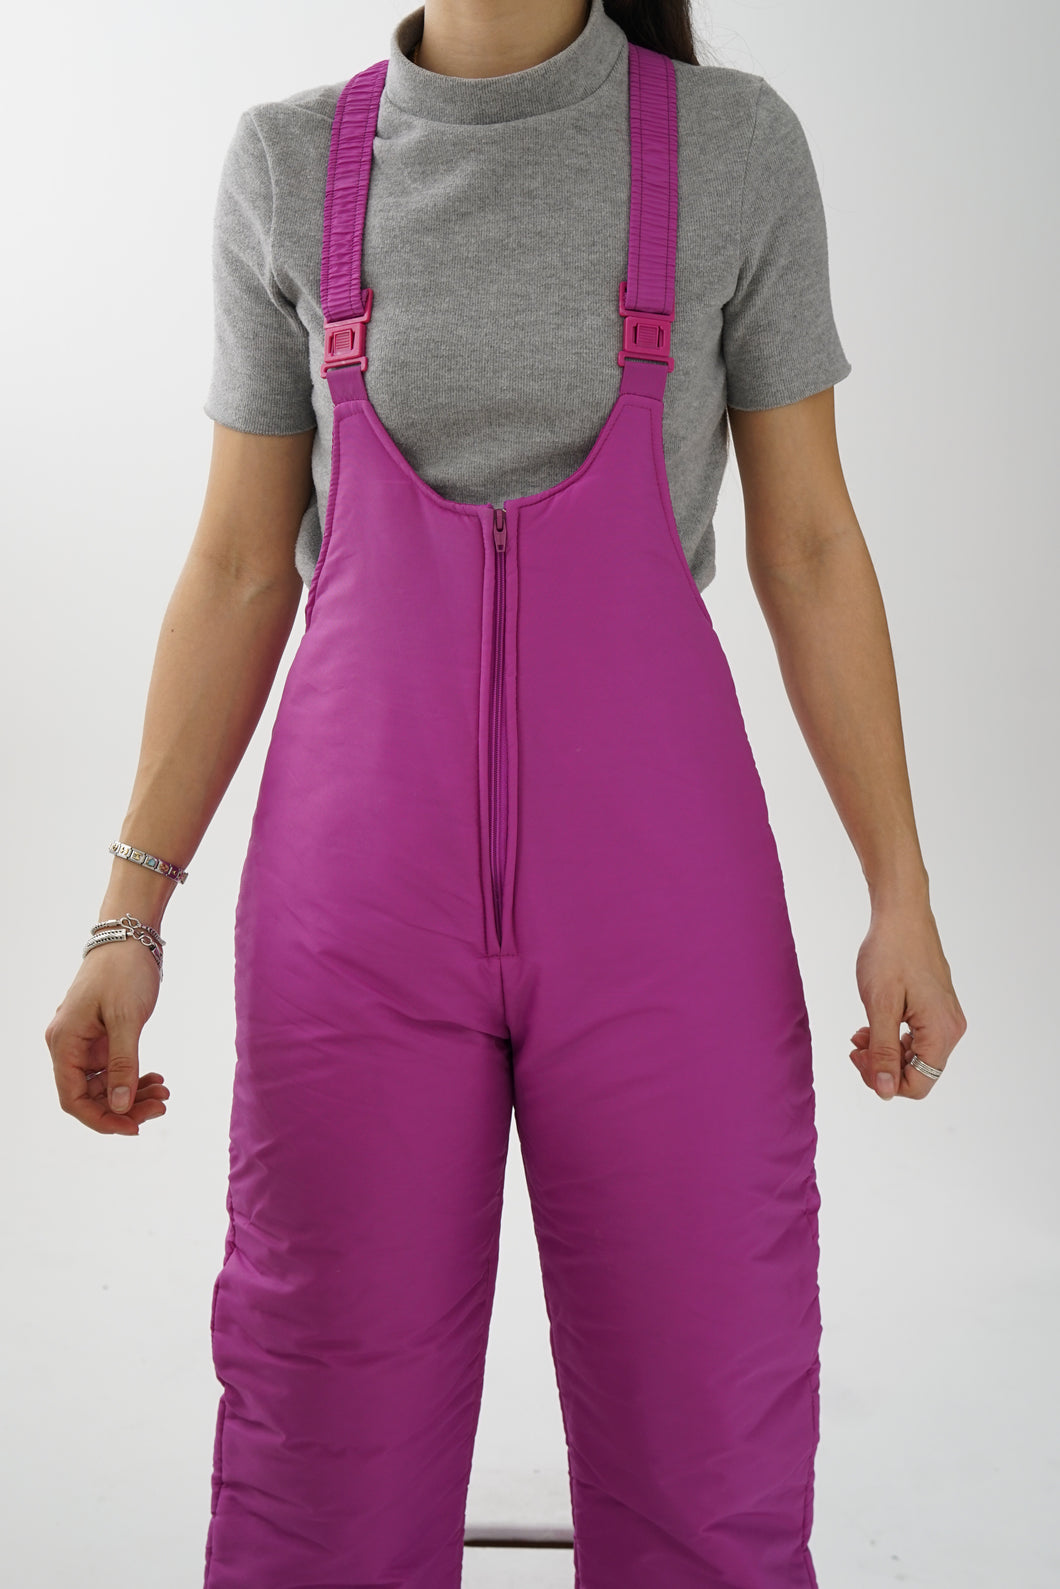 Vintage magenta overalls snow pants for women size S